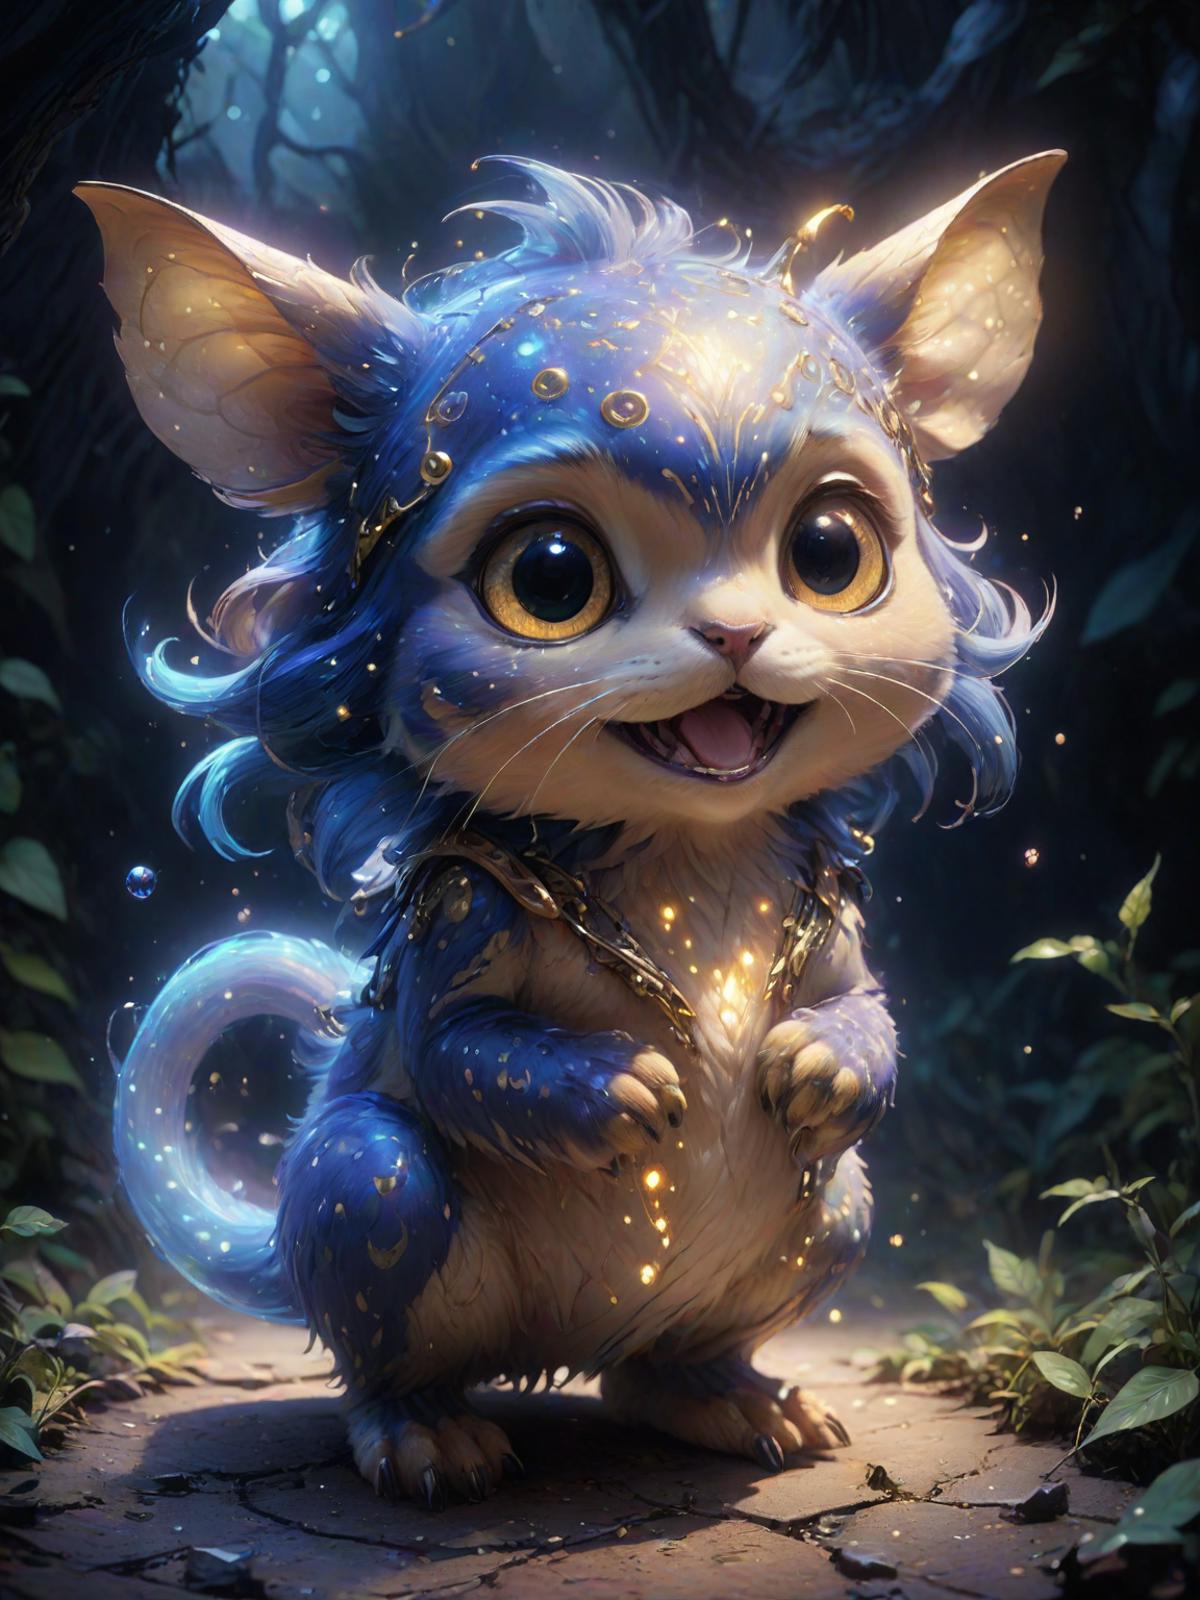 A blue kitten with yellow eyes and a gold crown on its head.